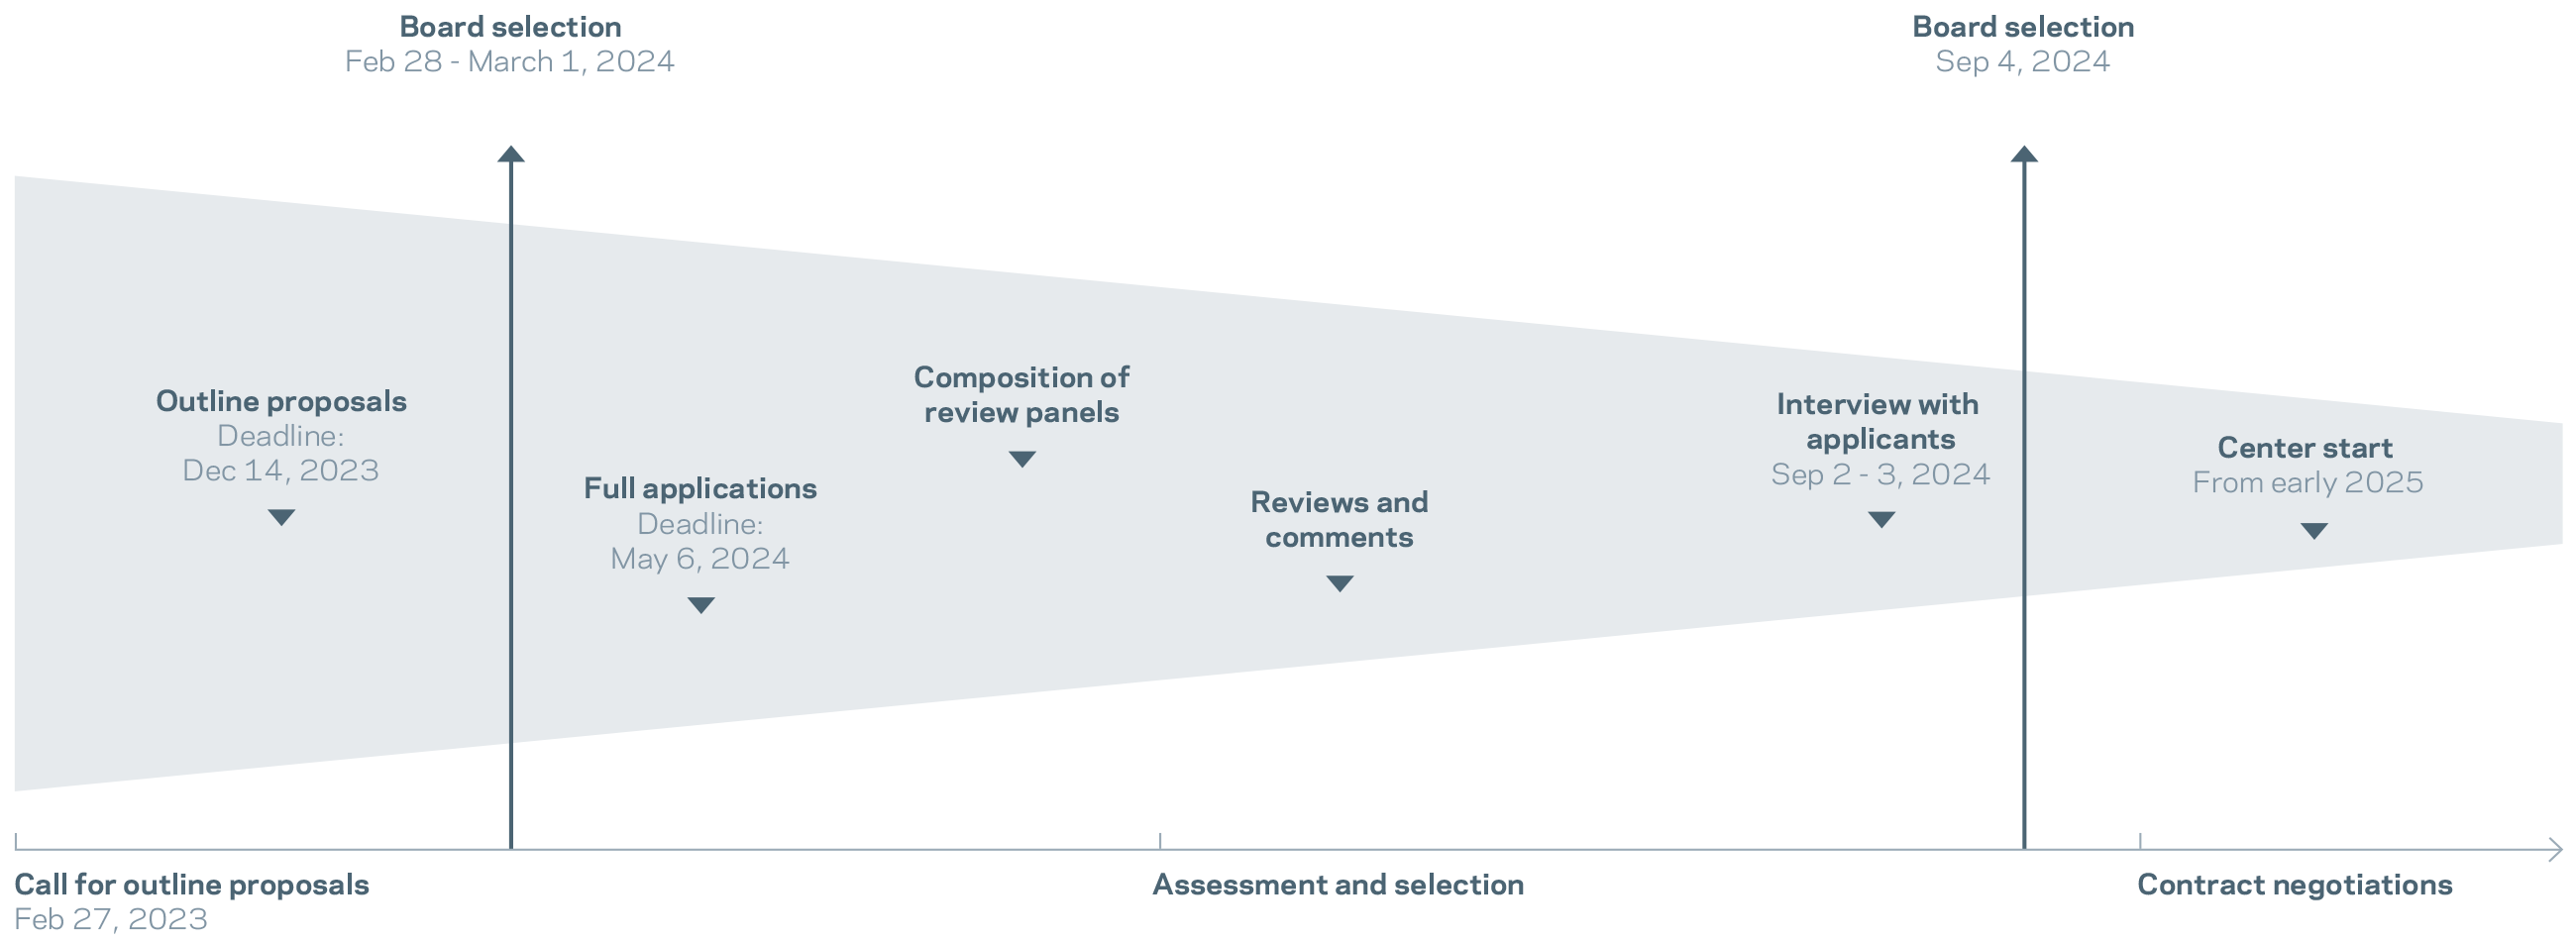 Overview of evaluation process